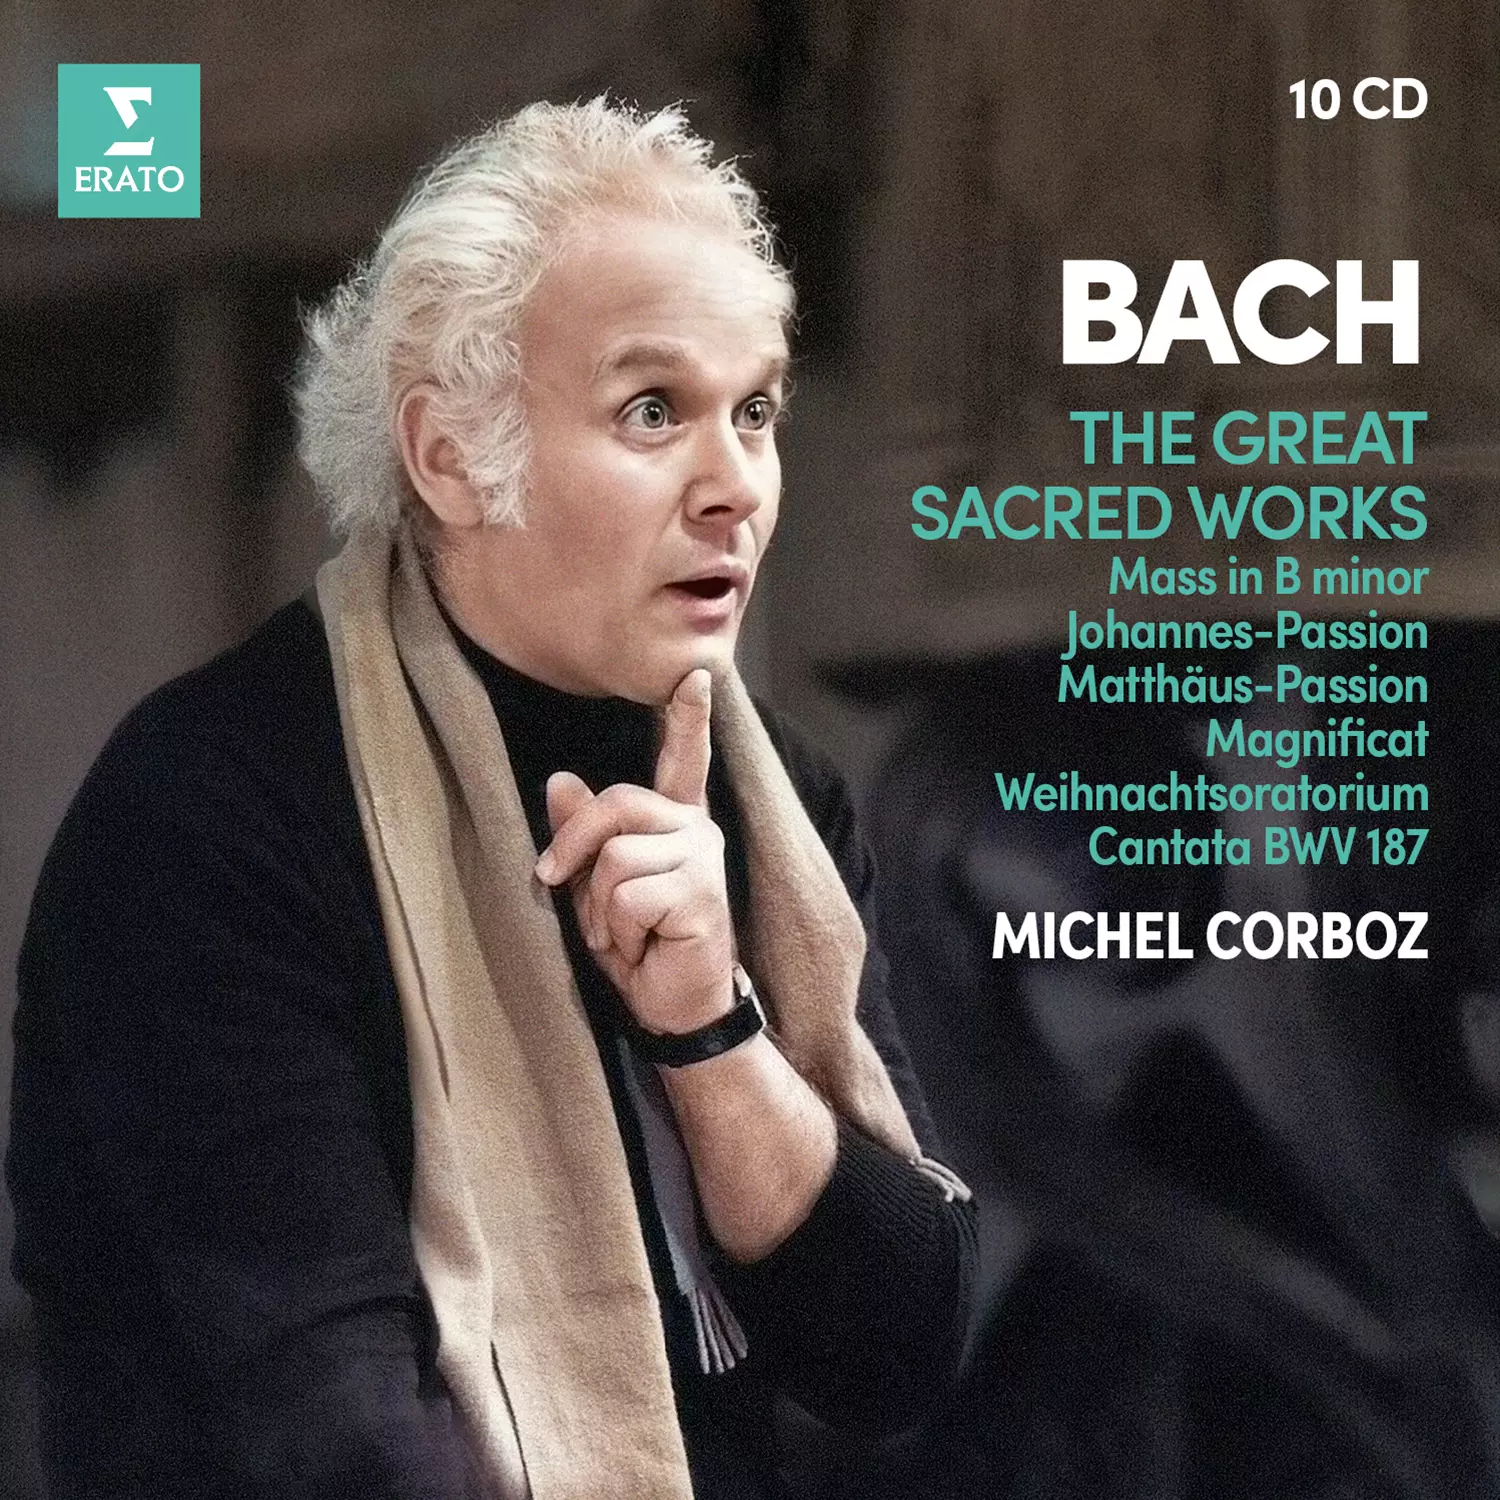 Michel Corboz - Bach: The Great Sacred Works